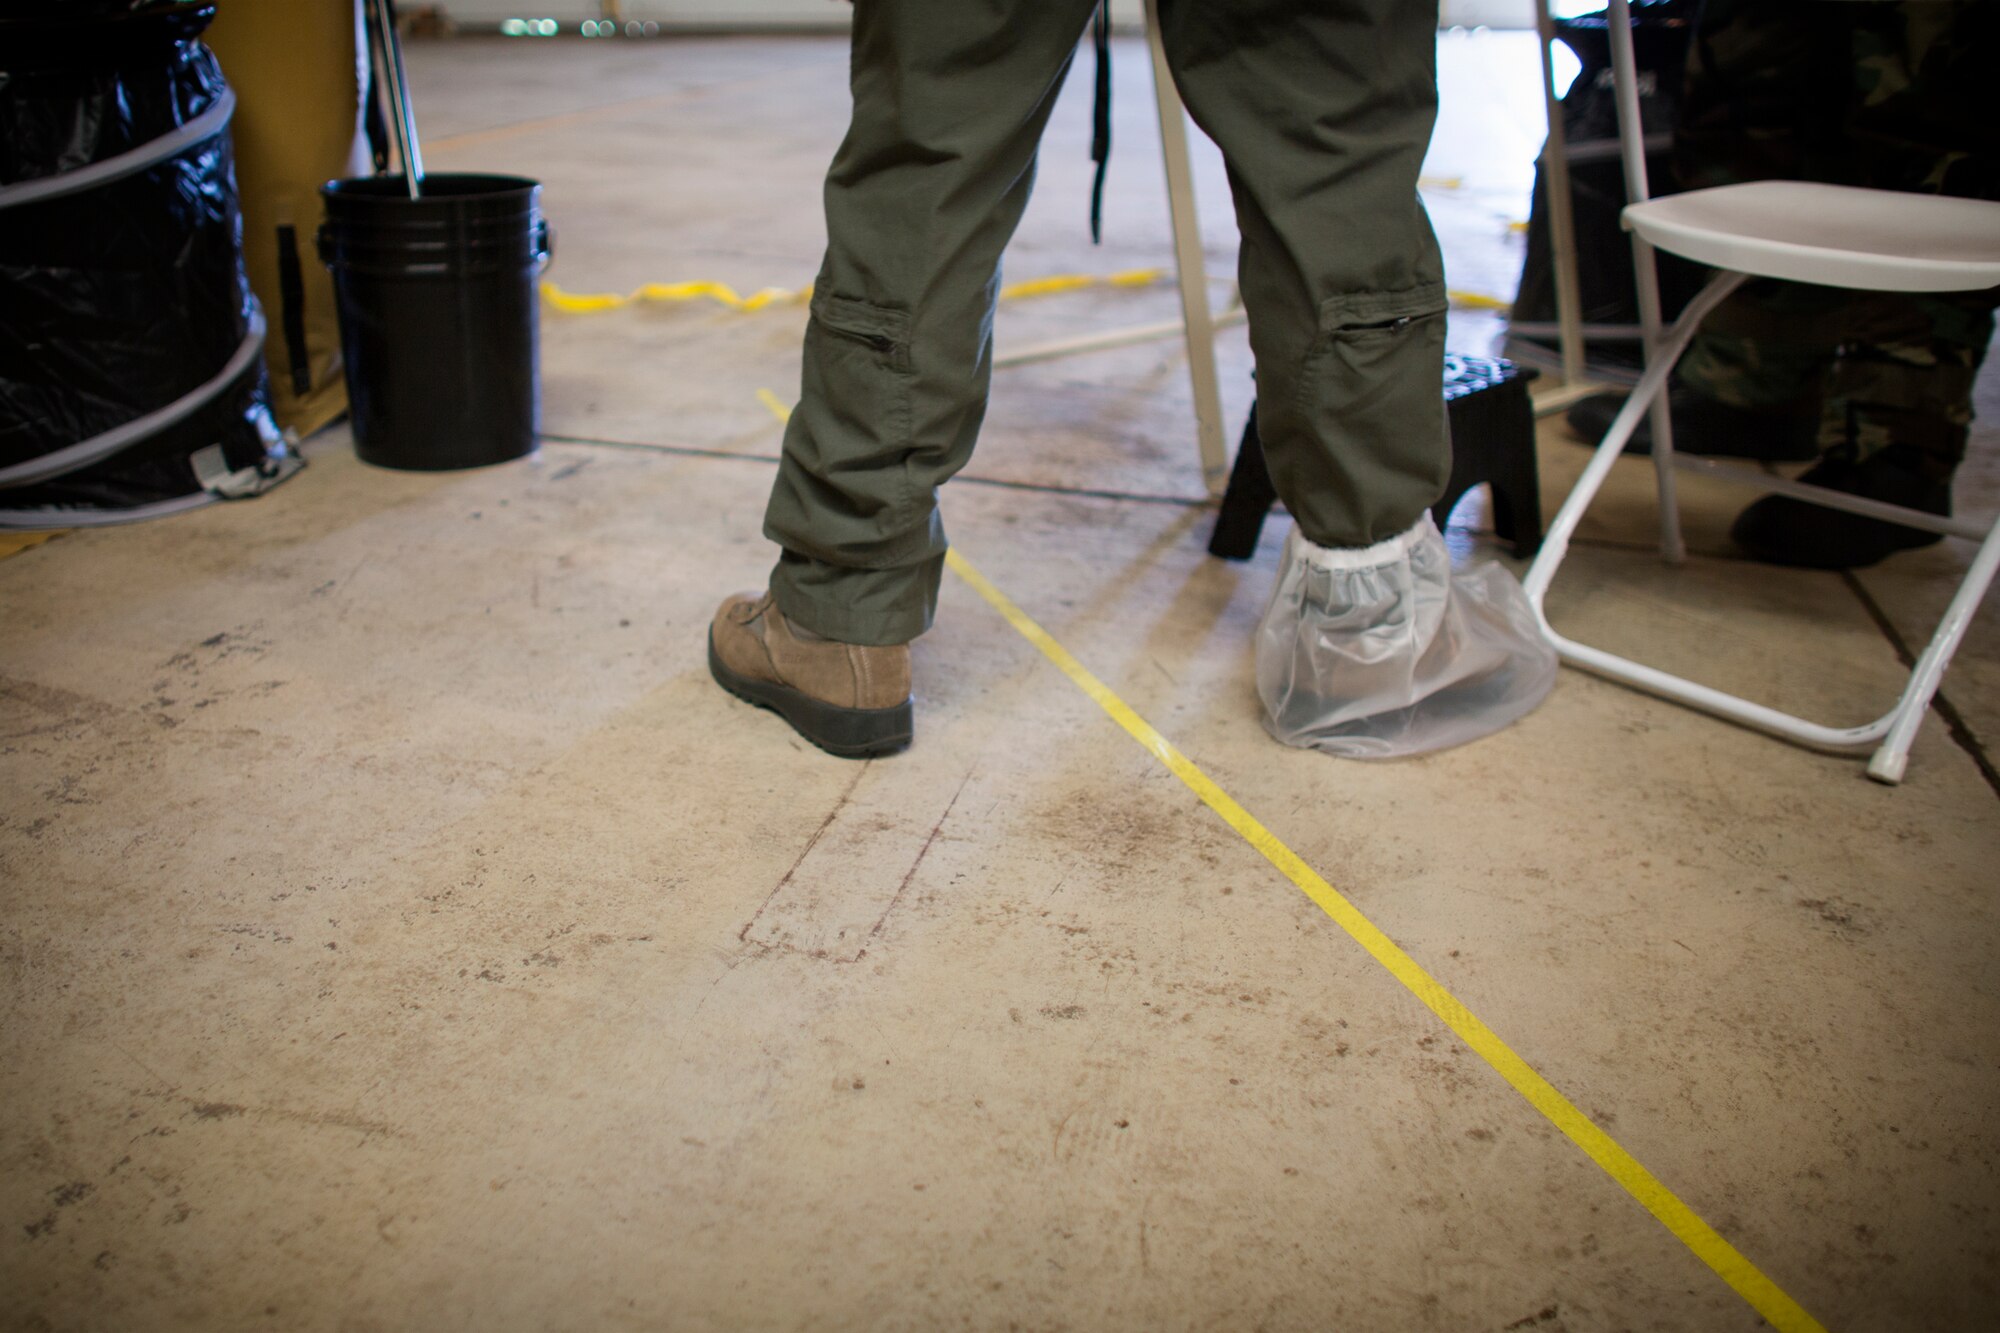 An aircrew member from the 36th Airlift Squadron passes one foot over the delineation line separating the contact hazard area from the vapor hazard area through during a Samurai Readiness Inspection at Yokota Air Base, Japan, May 20, 2015. Airmen from the 36th AS and 374th Operations Support Squadron performed aircrew decontamination procedures with the Lightweight Inflatable Decontamination System (LIDS). The LIDS takes about 20 minutes to set up and consists of four stations for rinsing off excess chemicals and a process to dispose of contaminated clothing and aircrew equipment. (U.S. Air Force photo by Osakabe Yasuo/Released)